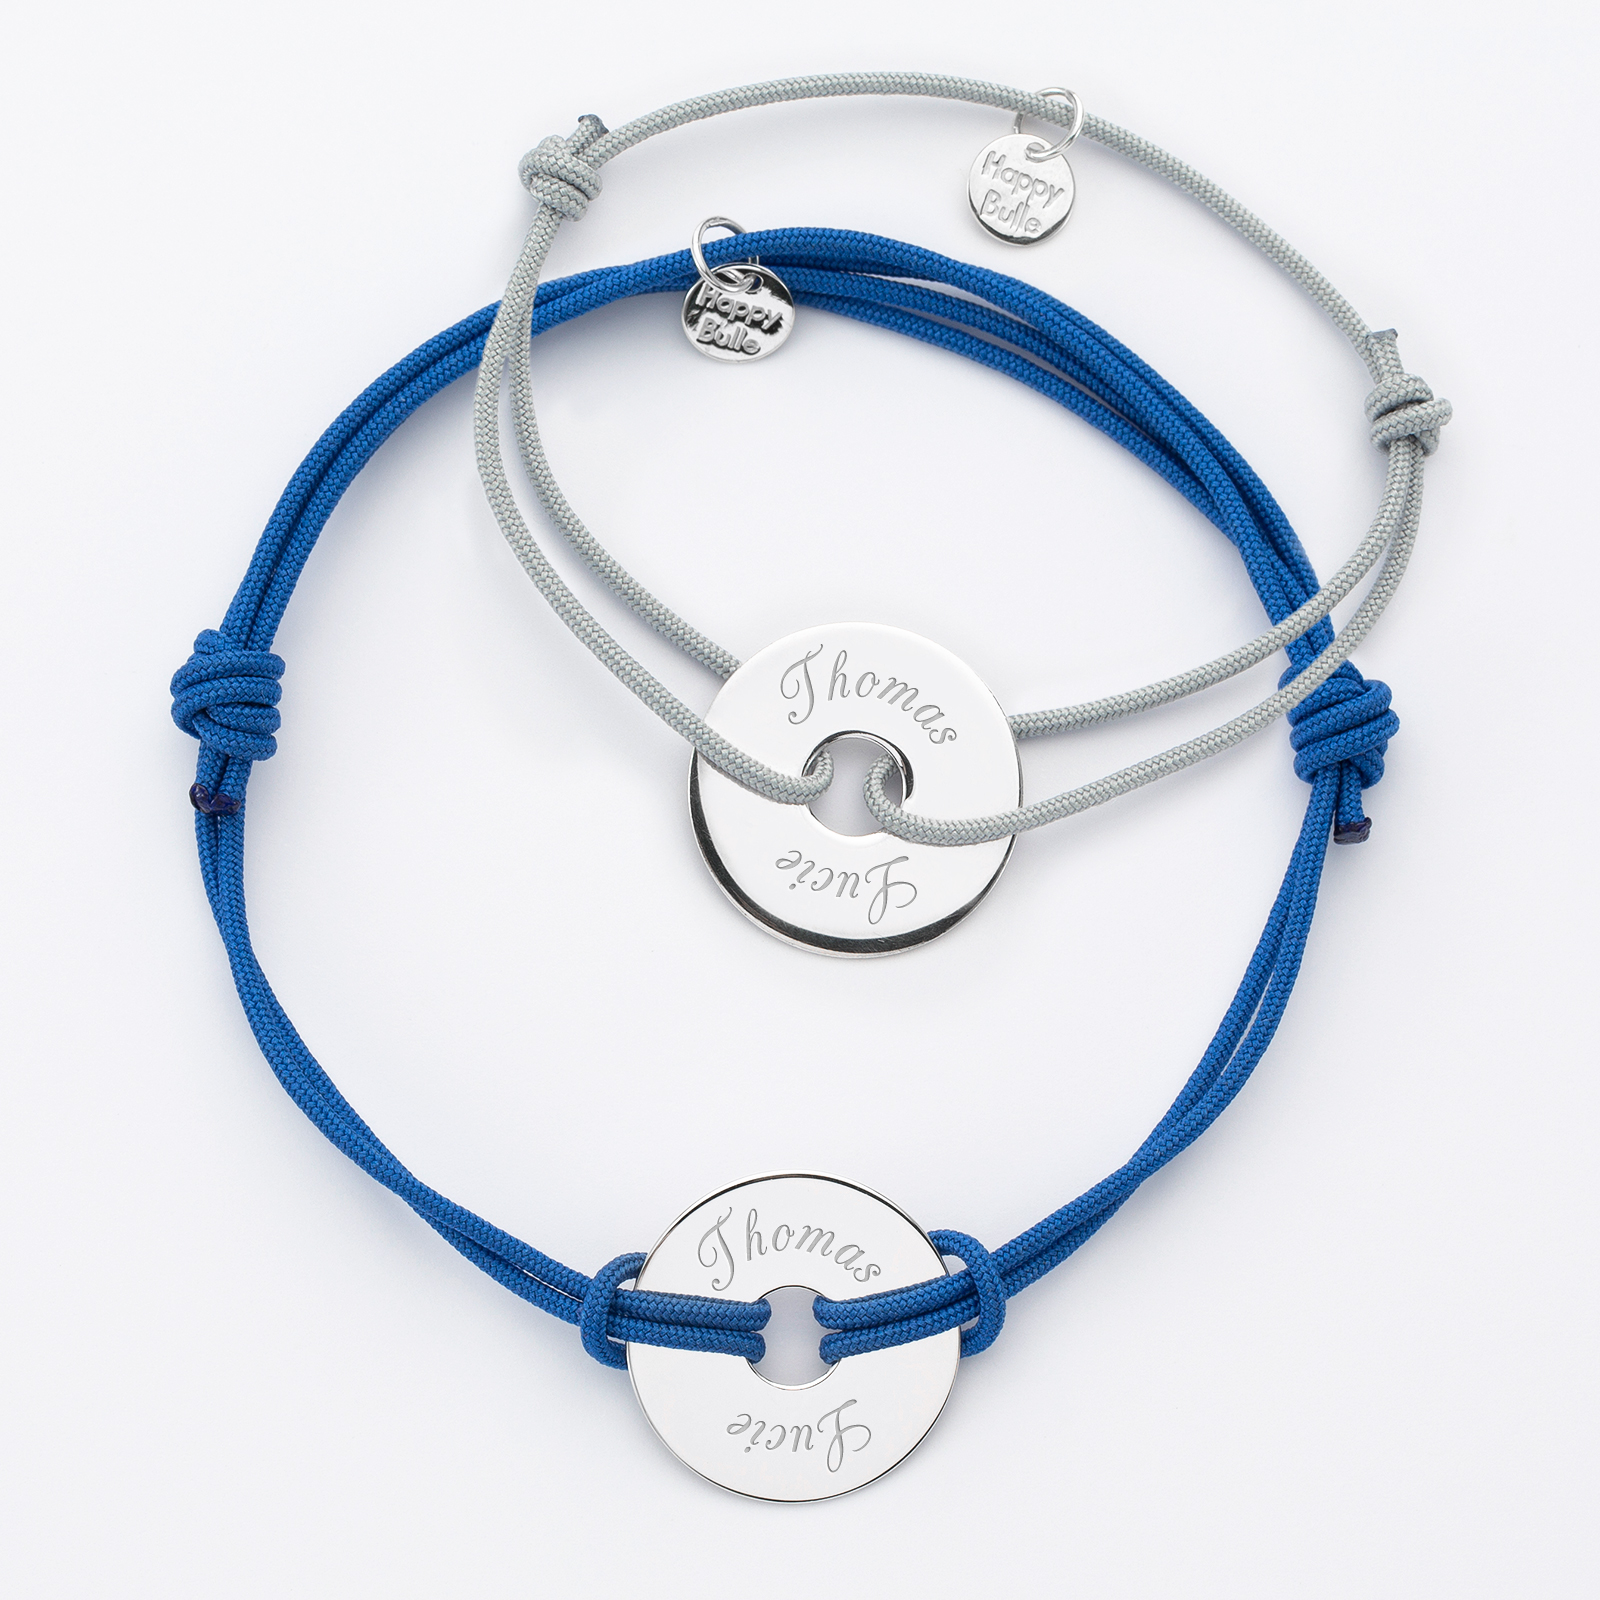 Pair of personalised bracelets with engraved target silver medallions 20mm names 